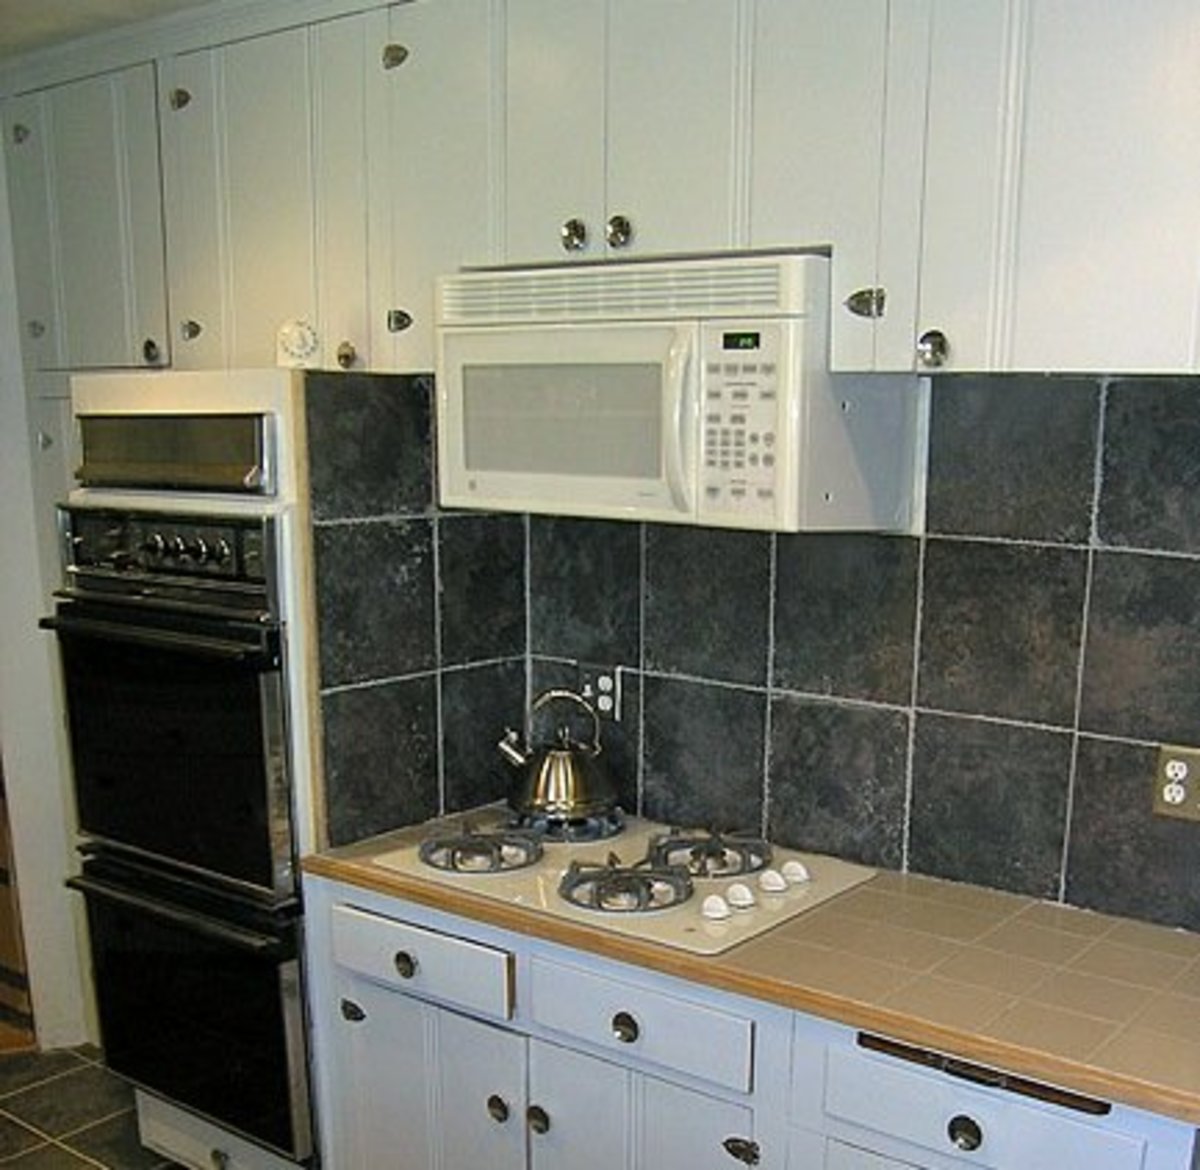 Microwave above the stove top.